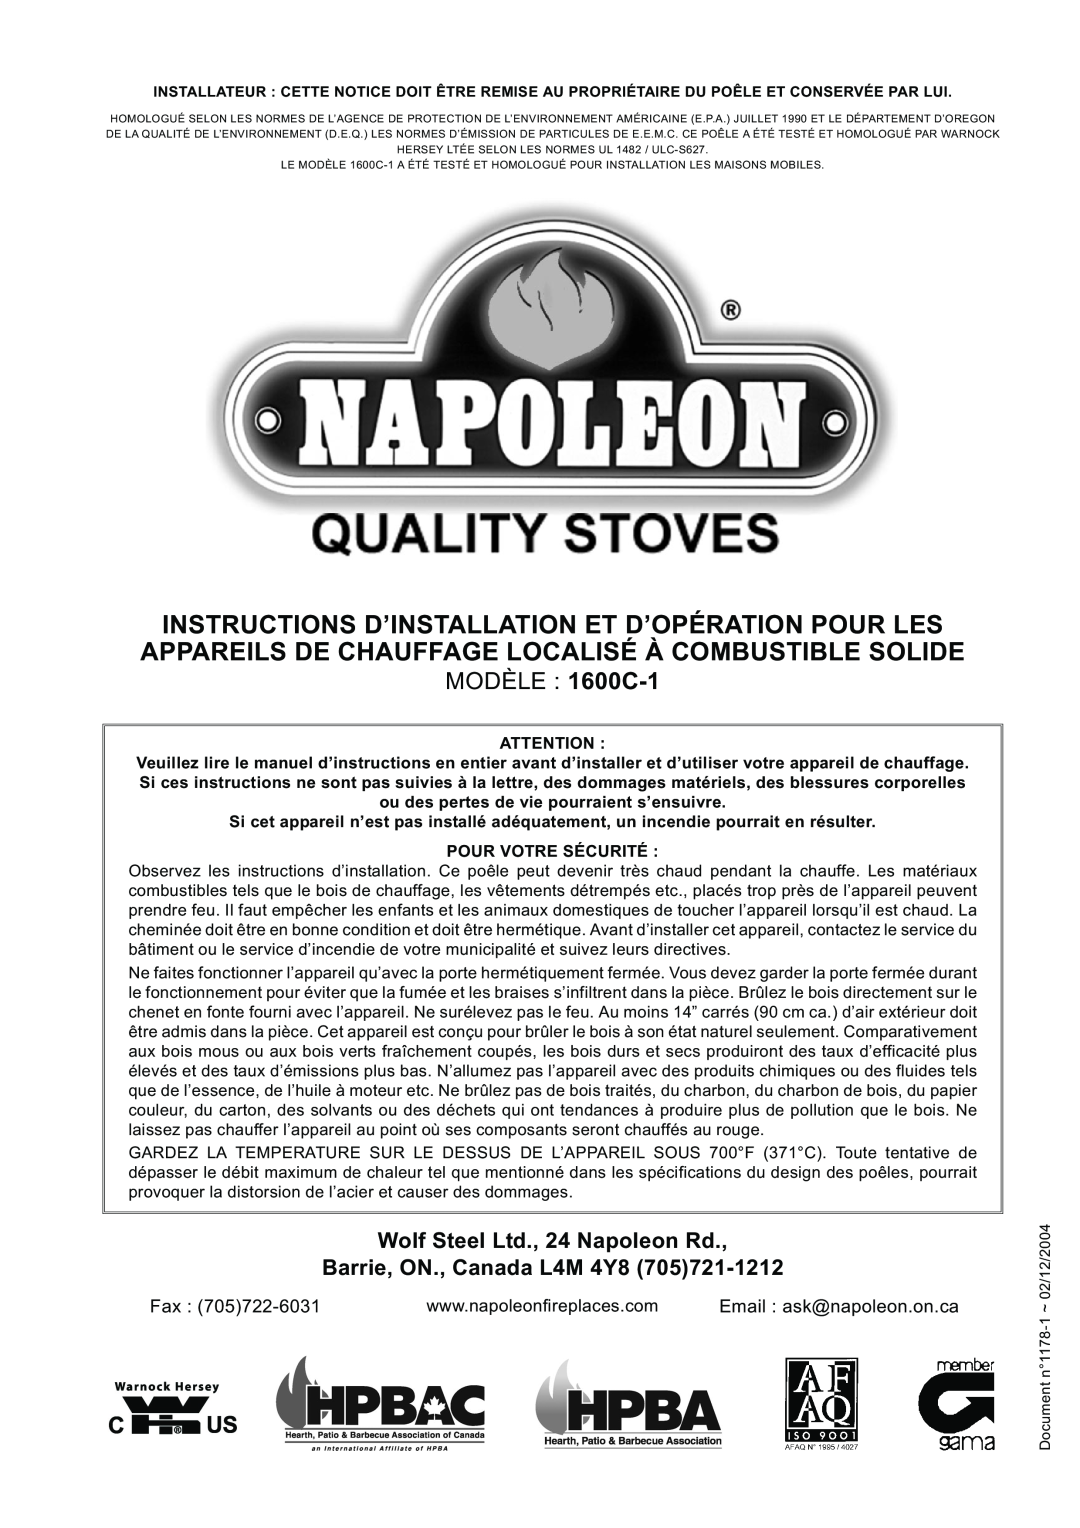 Napoleon Fireplaces specifications MODÈLE 1600C-1, Barrie, ON., Canada L4M 4Y8 